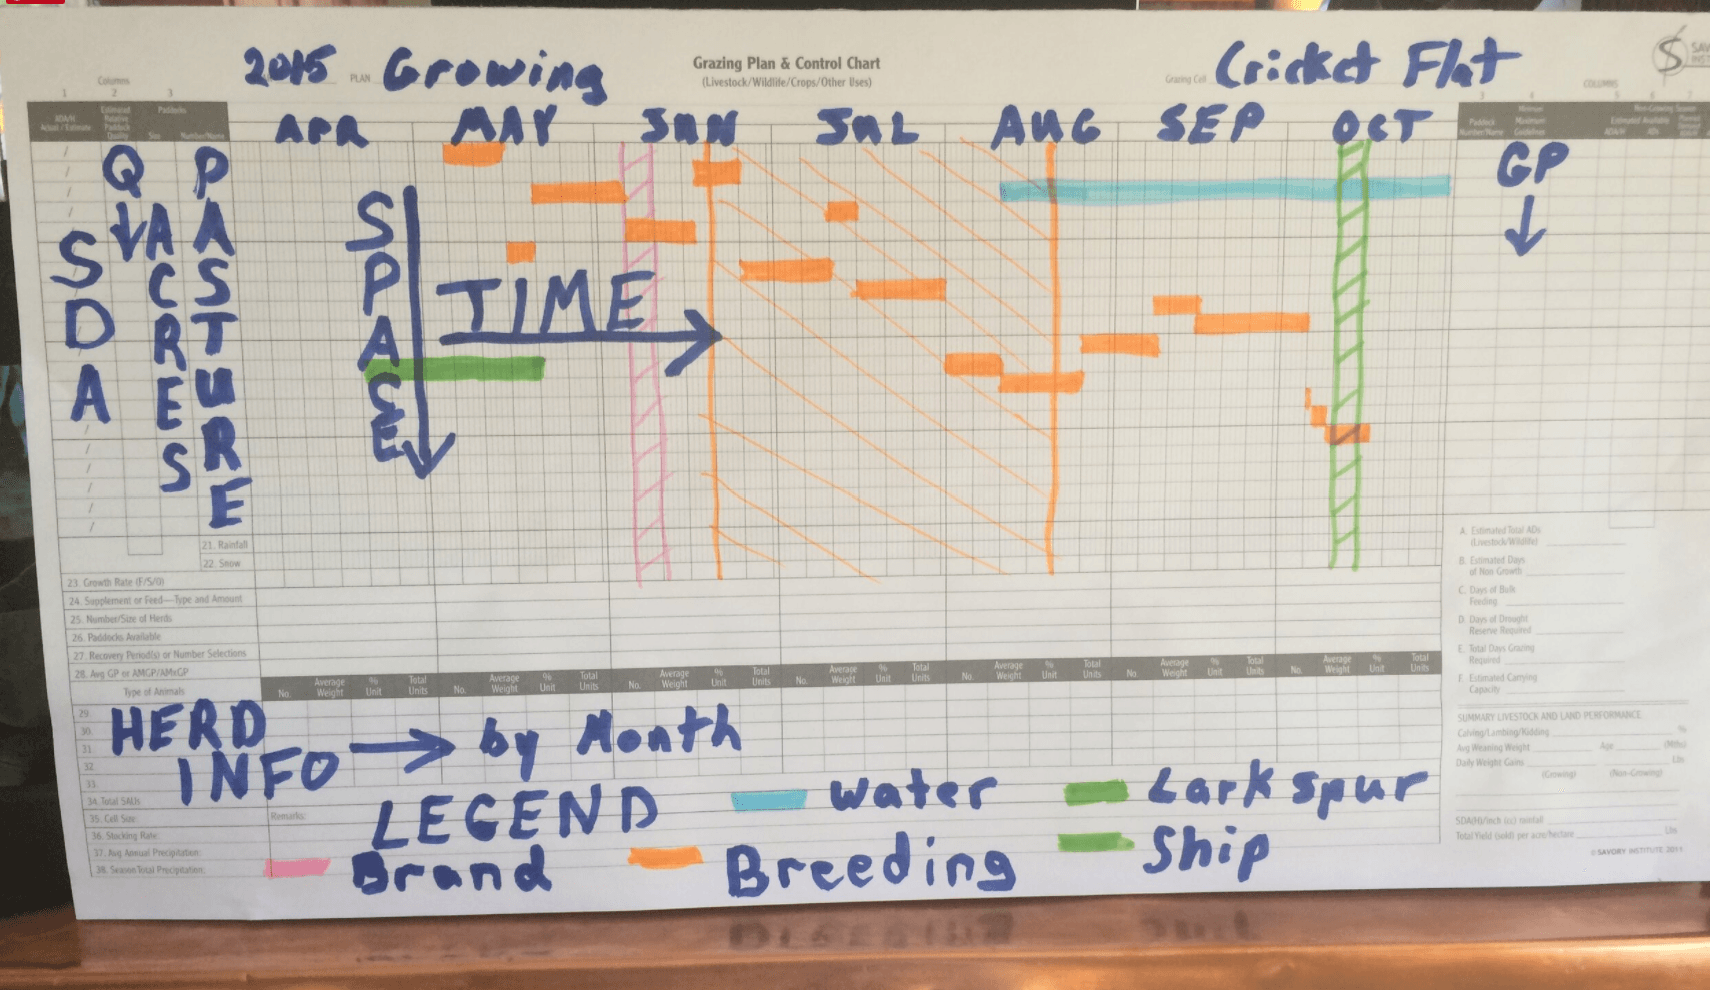 Image of Holistic Planned Grazing Chart marked up by hand